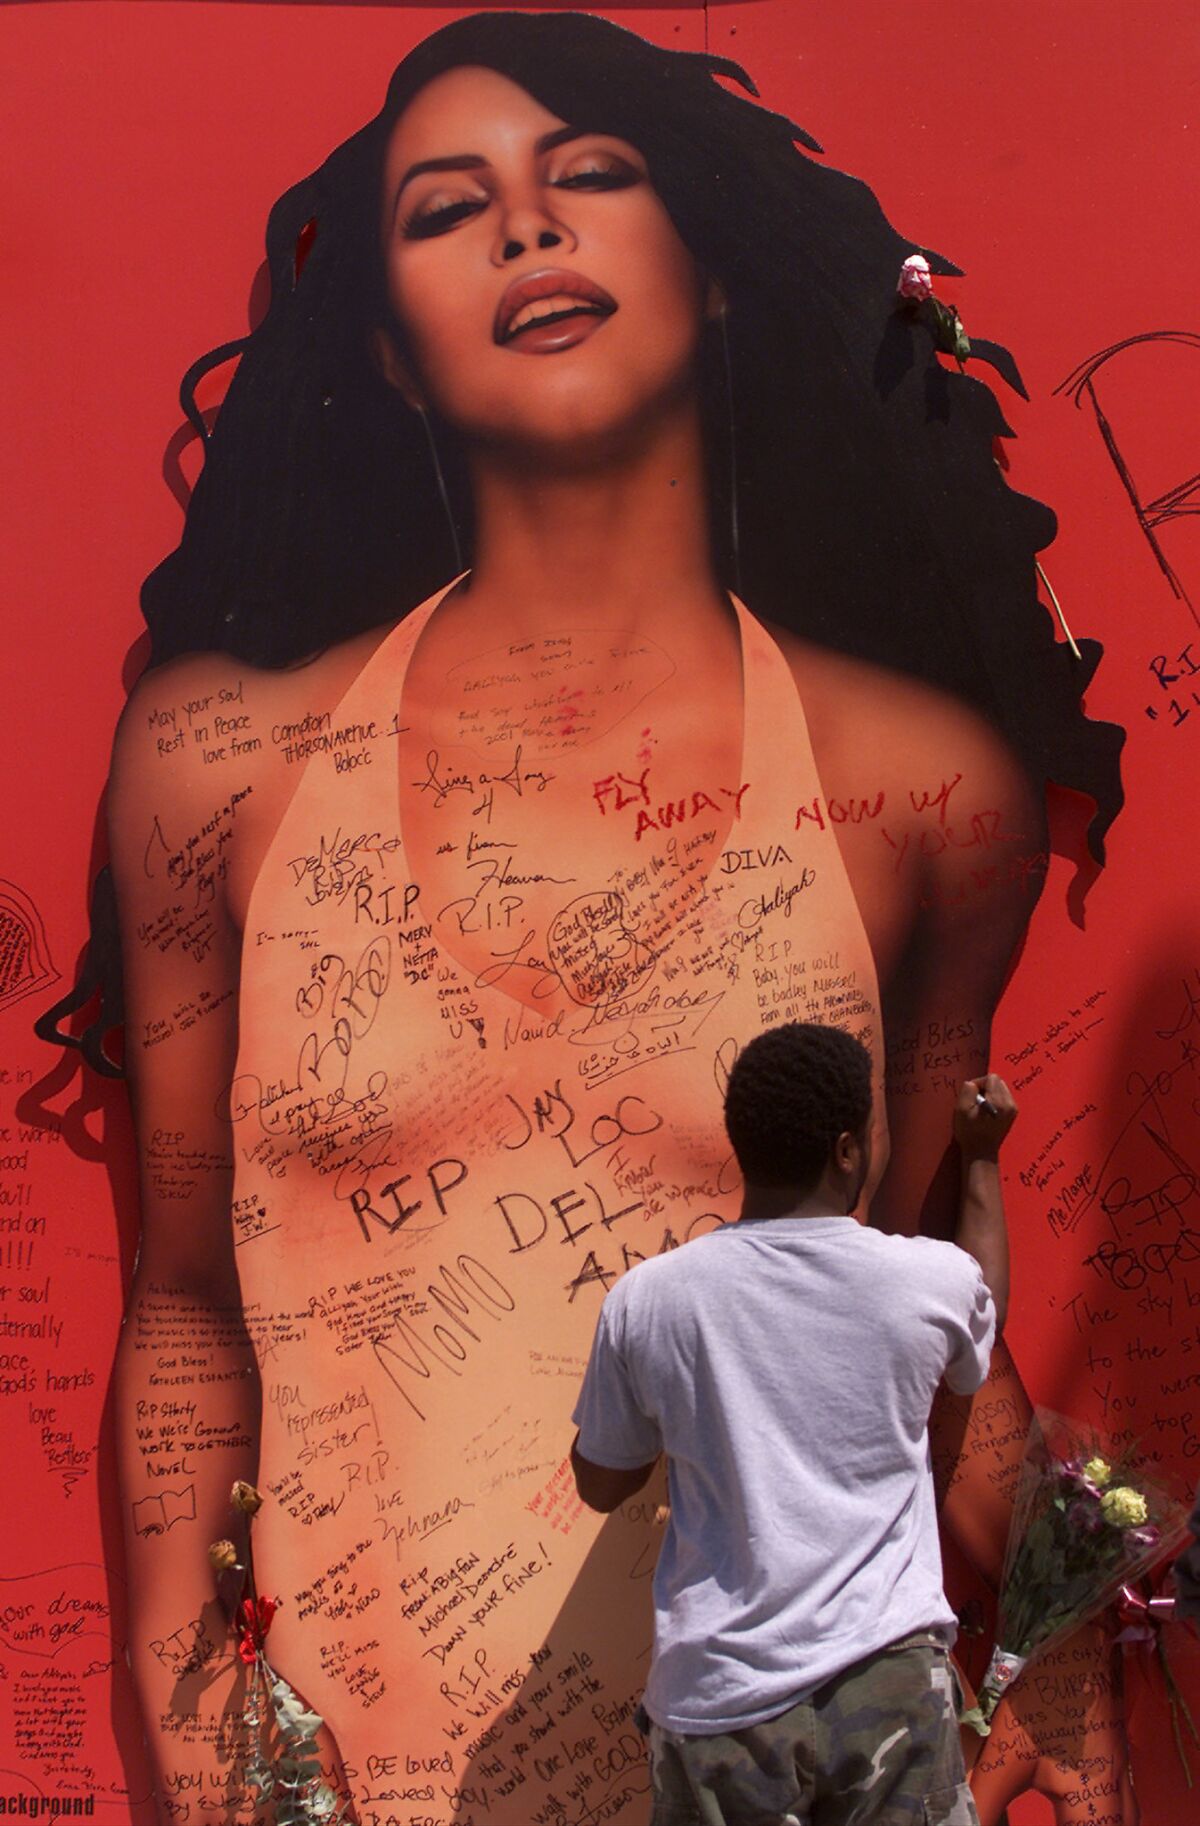 A fan writes a message on a billboard at Tower Records in Hollywood on Sunset Boulevard promoting Aaliyah’s 2001 album after the singer’s tragic death.